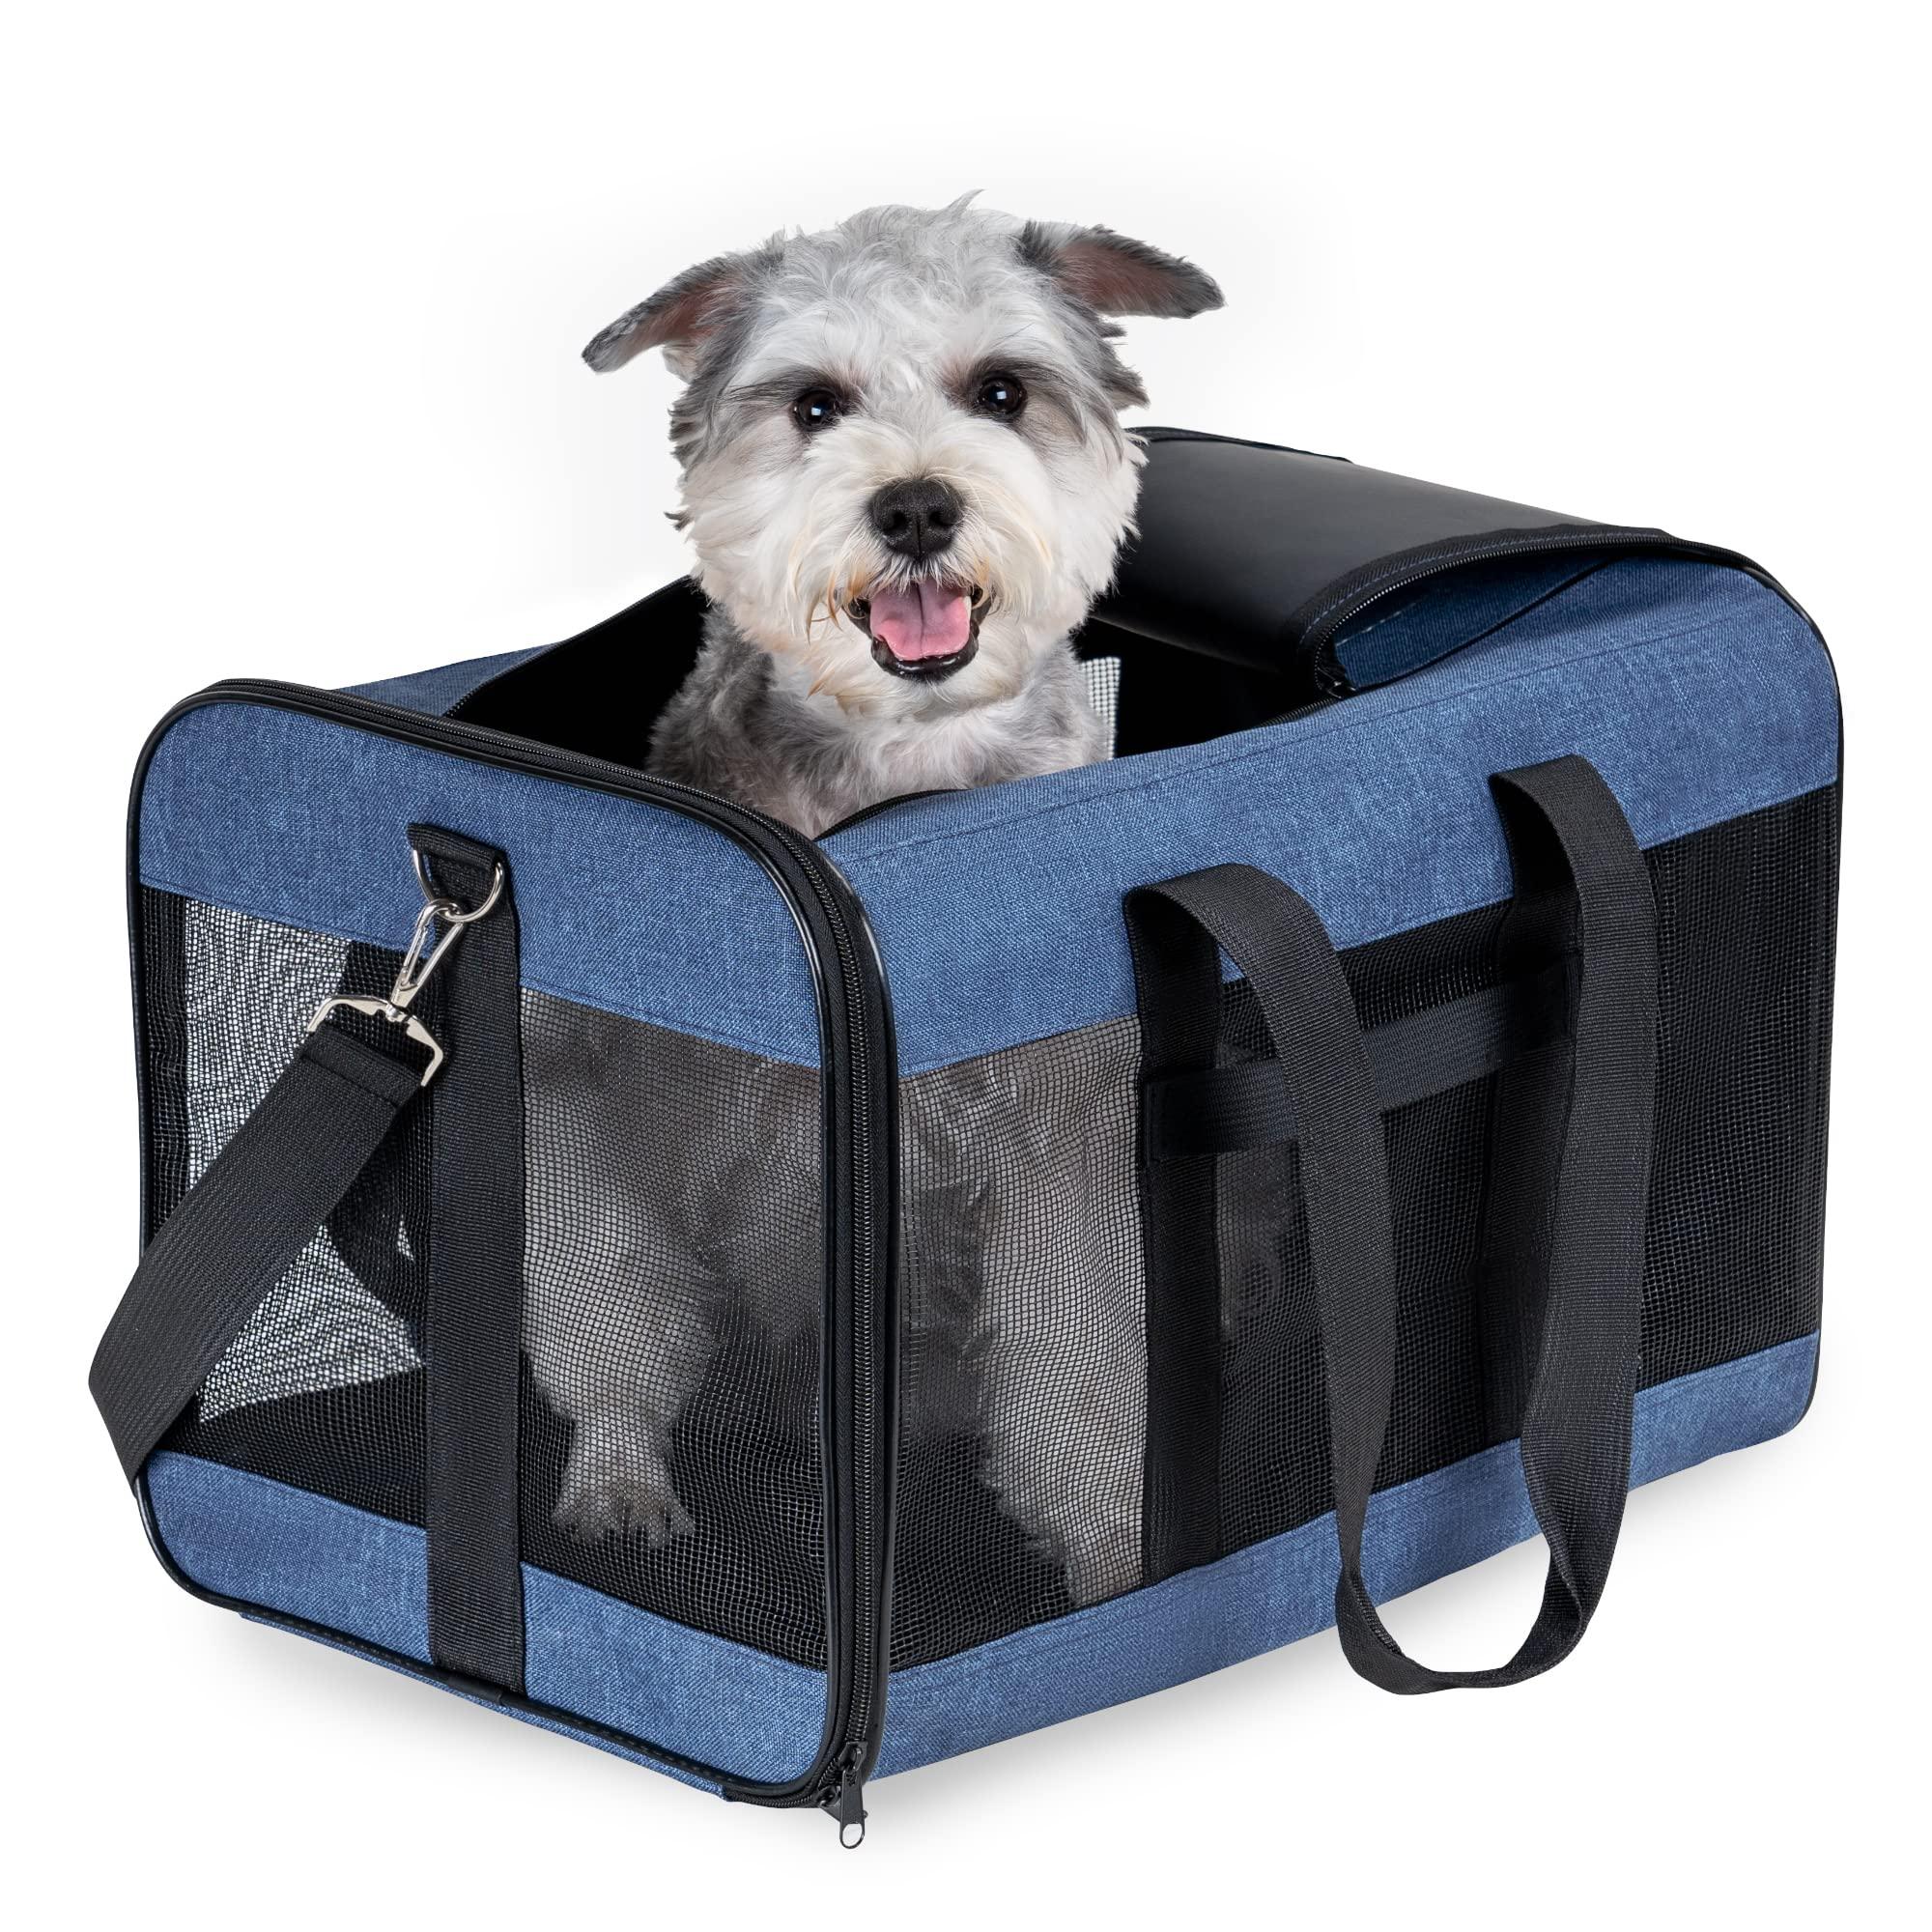 HITSLAM Pet carrier Dog carrier Soft Sided Pet Travel carrier for cats, Small dogs, Kittens or Puppies, collapsible, Durable, Airline Approved, Travel Friendly Blue (L)